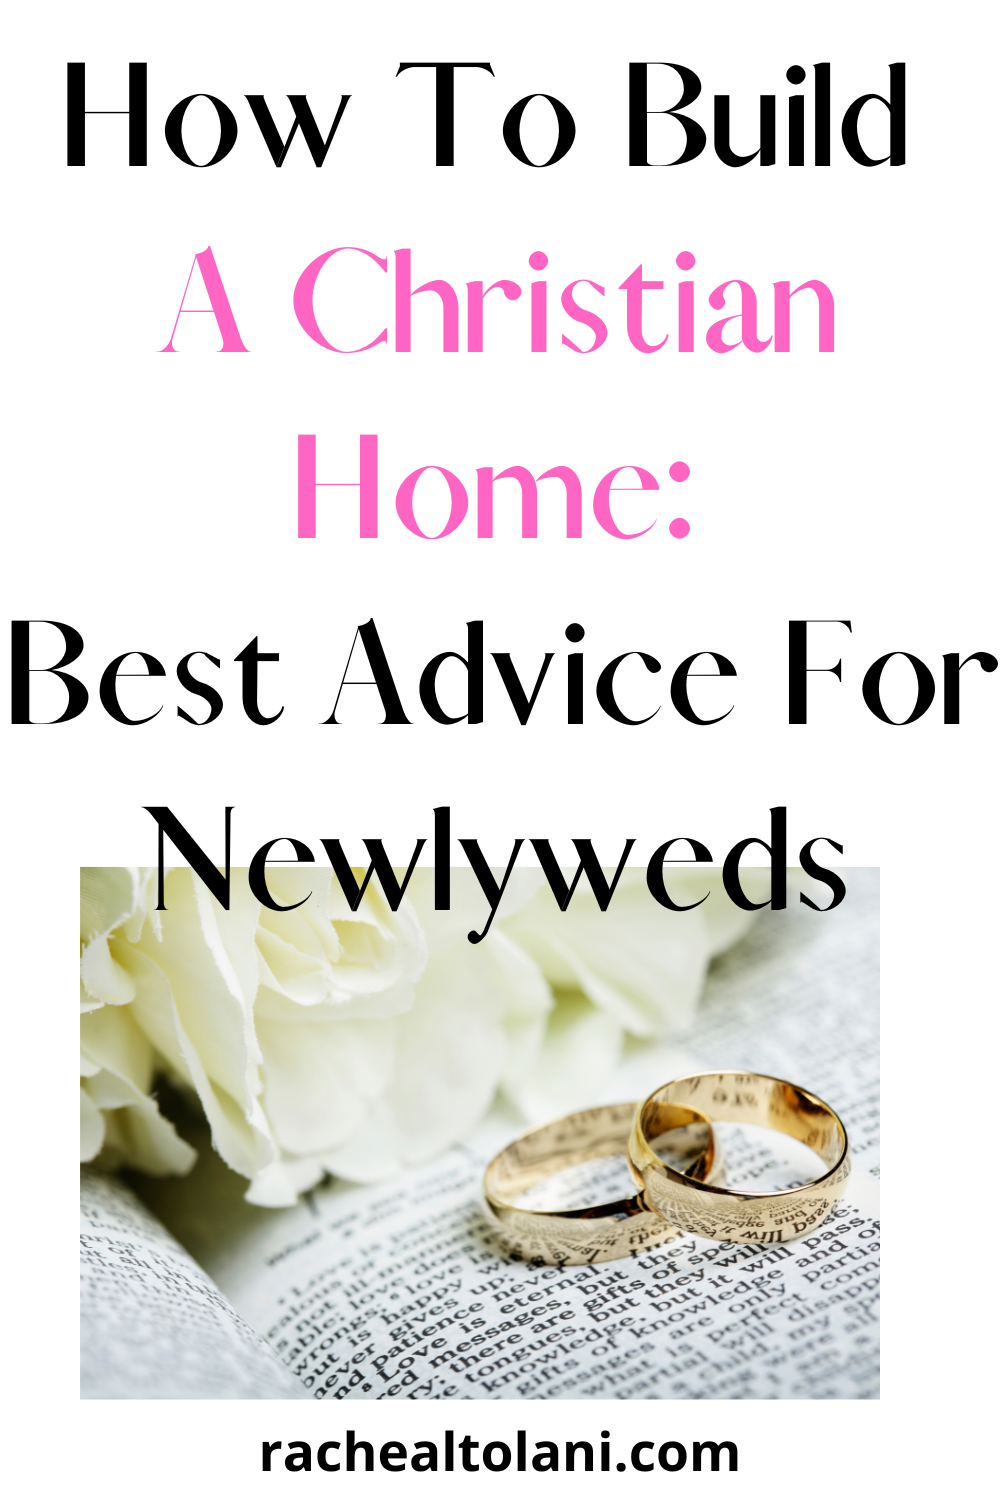 Christian marriage advice for newlyweds